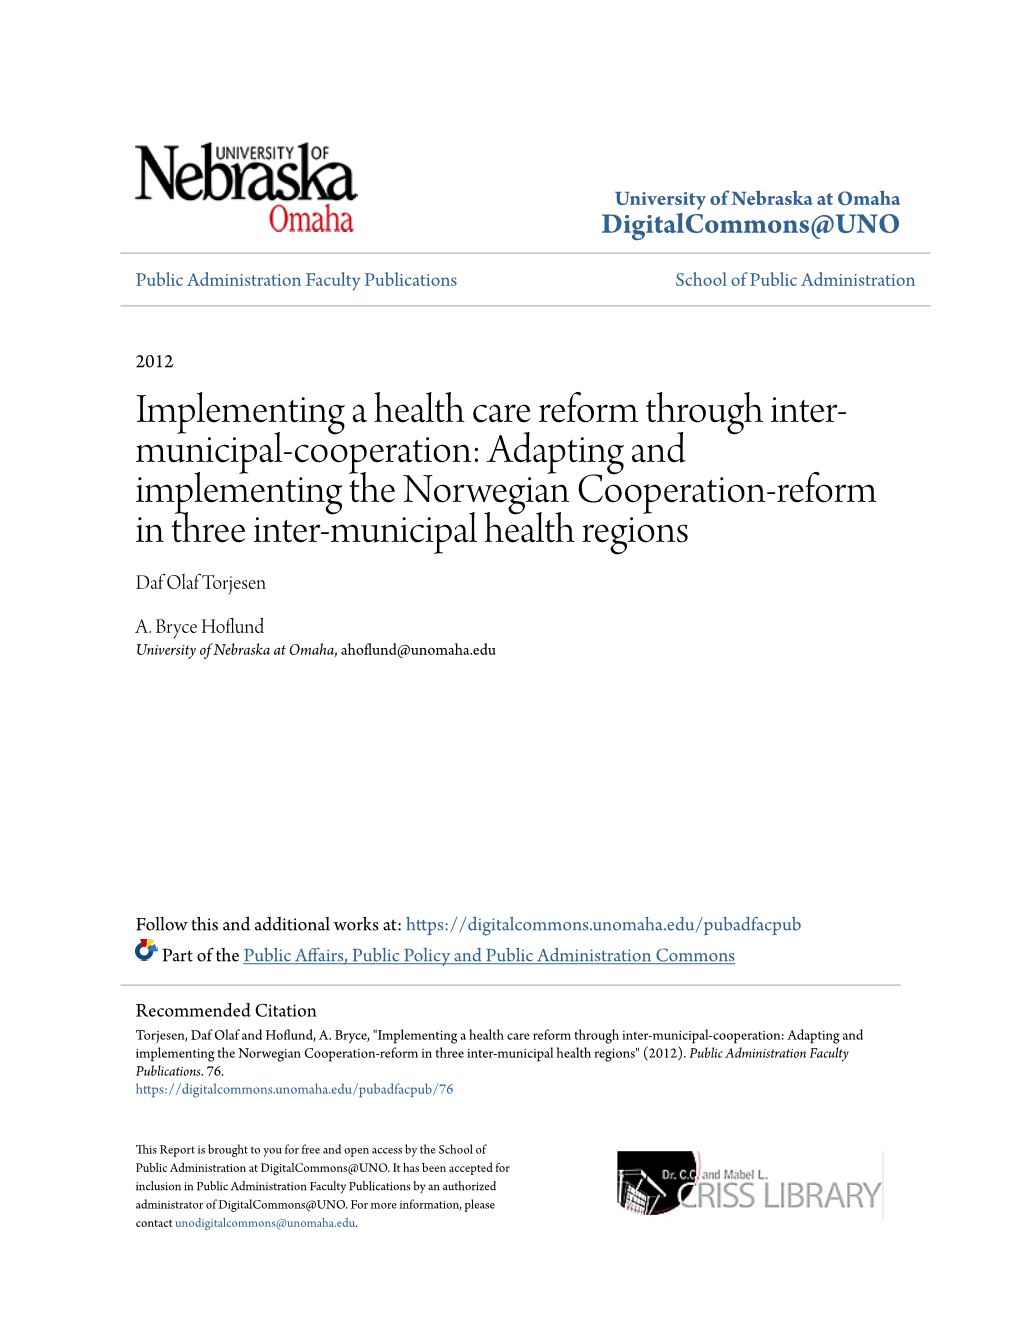 Implementing a Health Care Reform Through Inter-Municipal-Cooperation